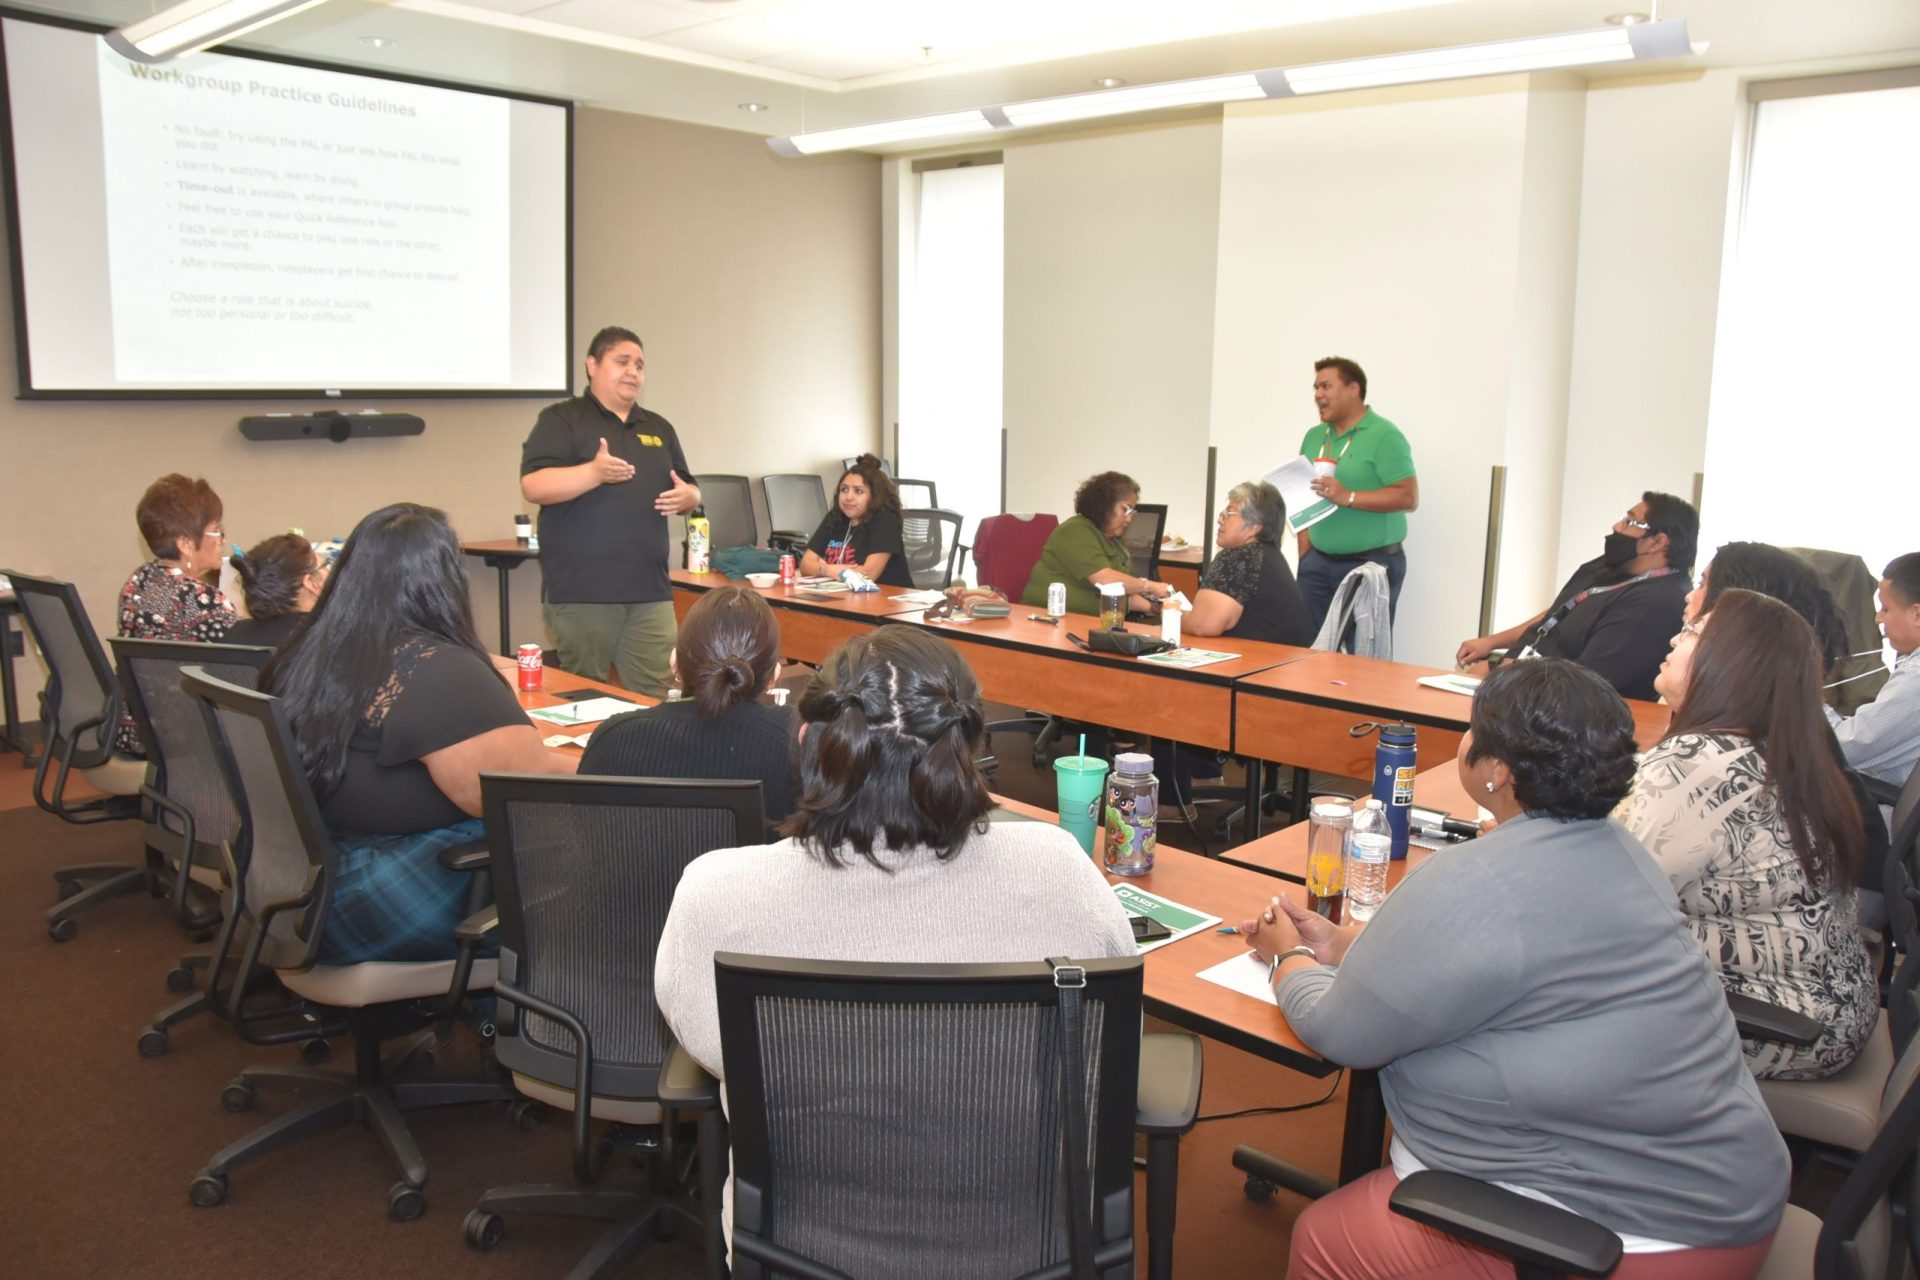 ASIST Training Workshop Provides Suicide First Aid Tools